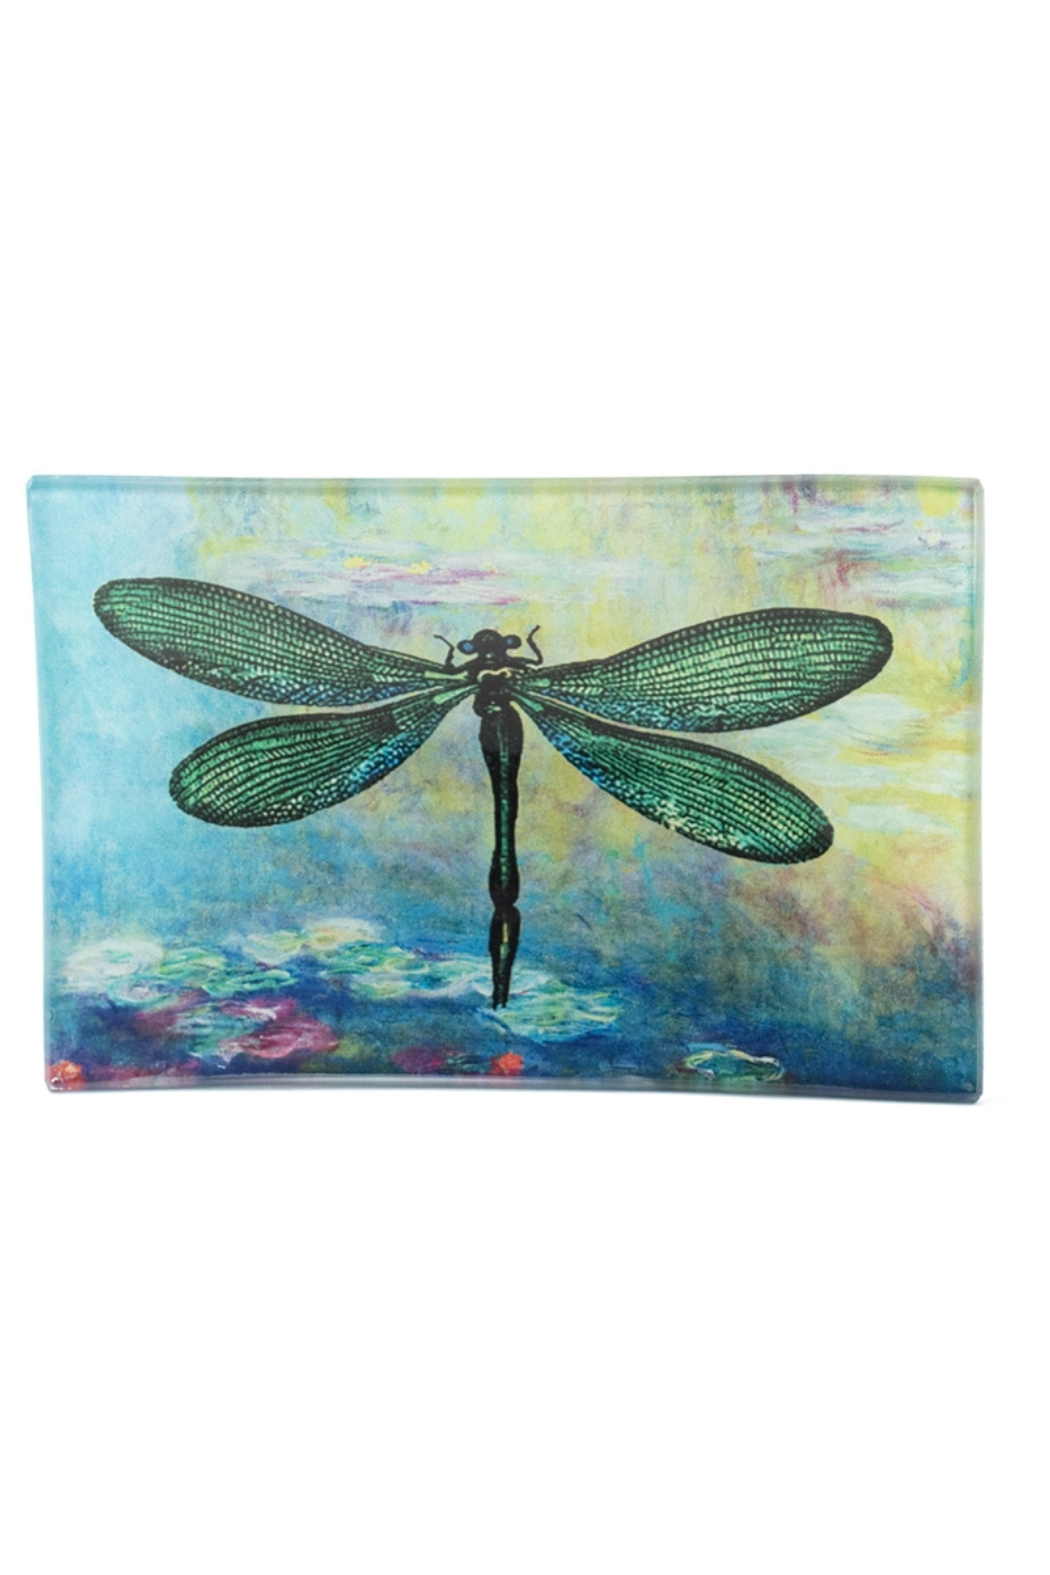 Dragonfly Tray with Dragonfly Legend